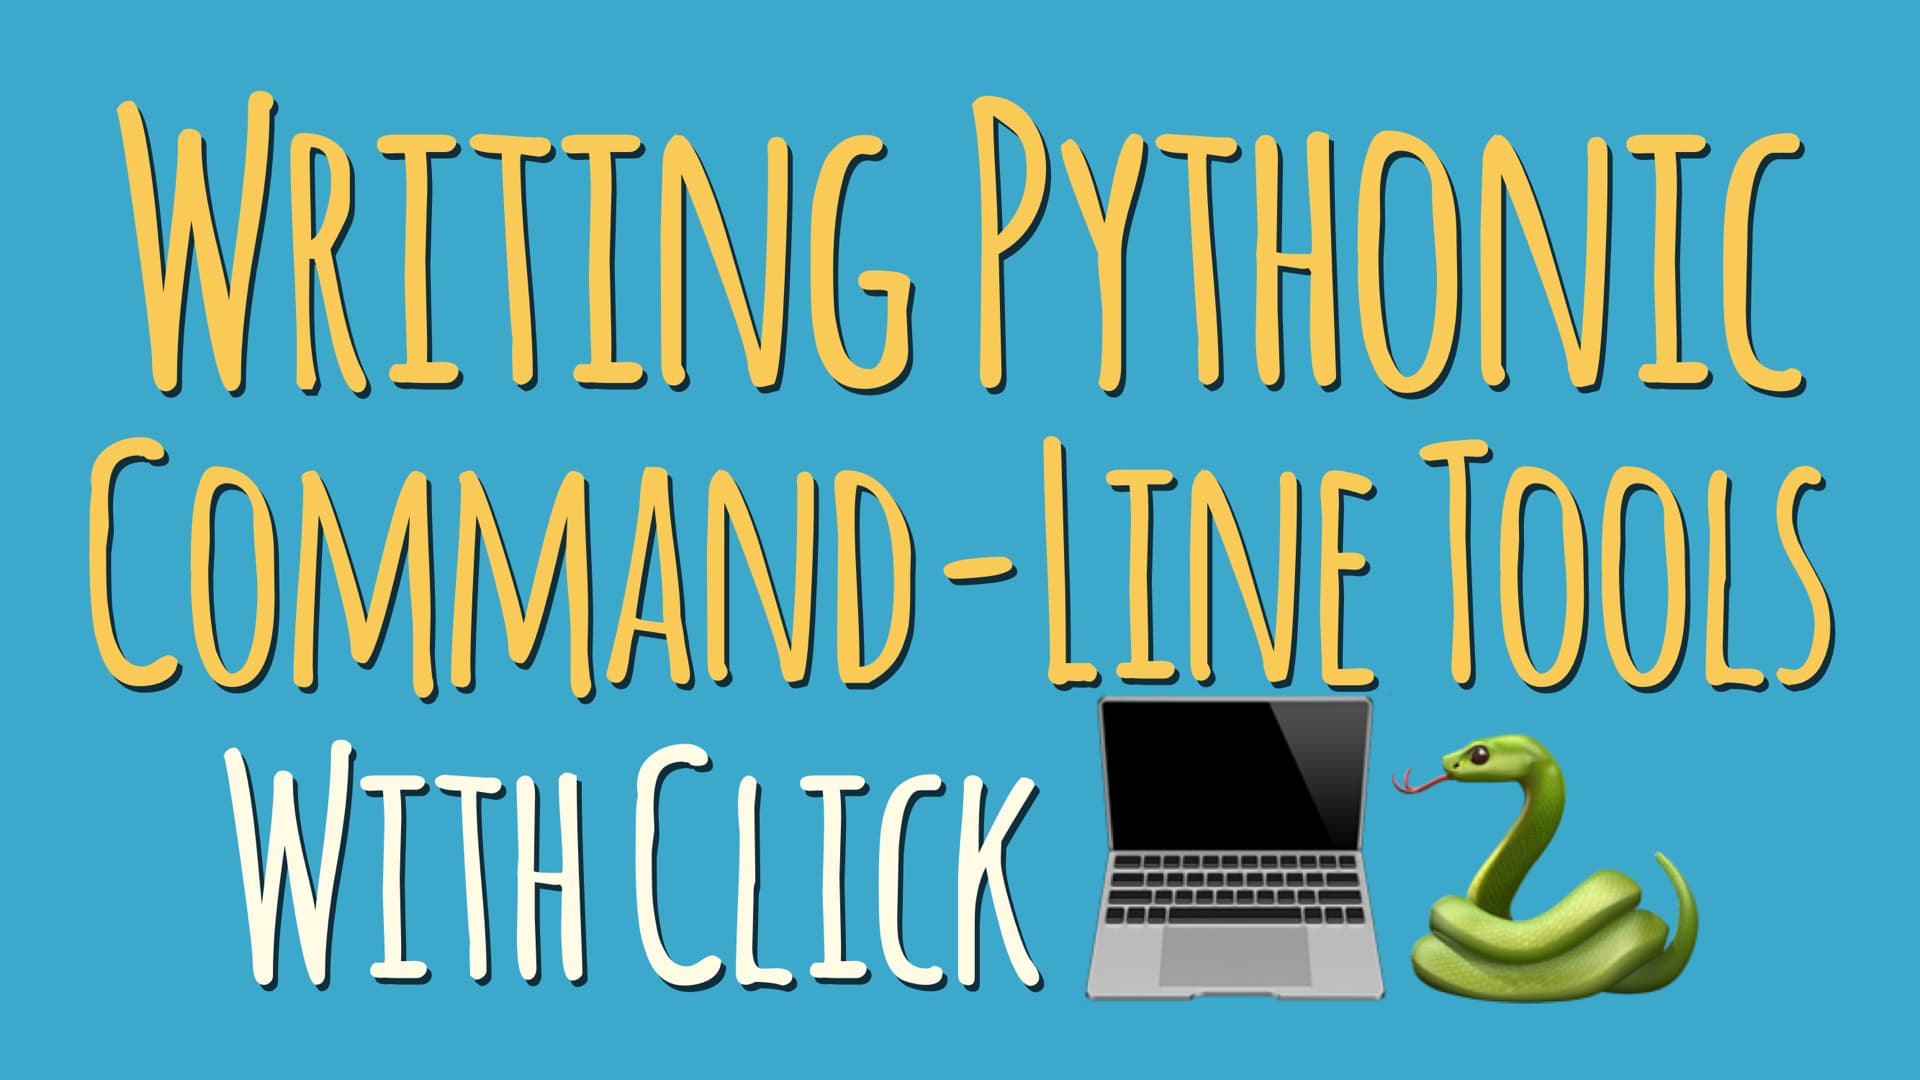 Writing Python Command-Line Tools With Click